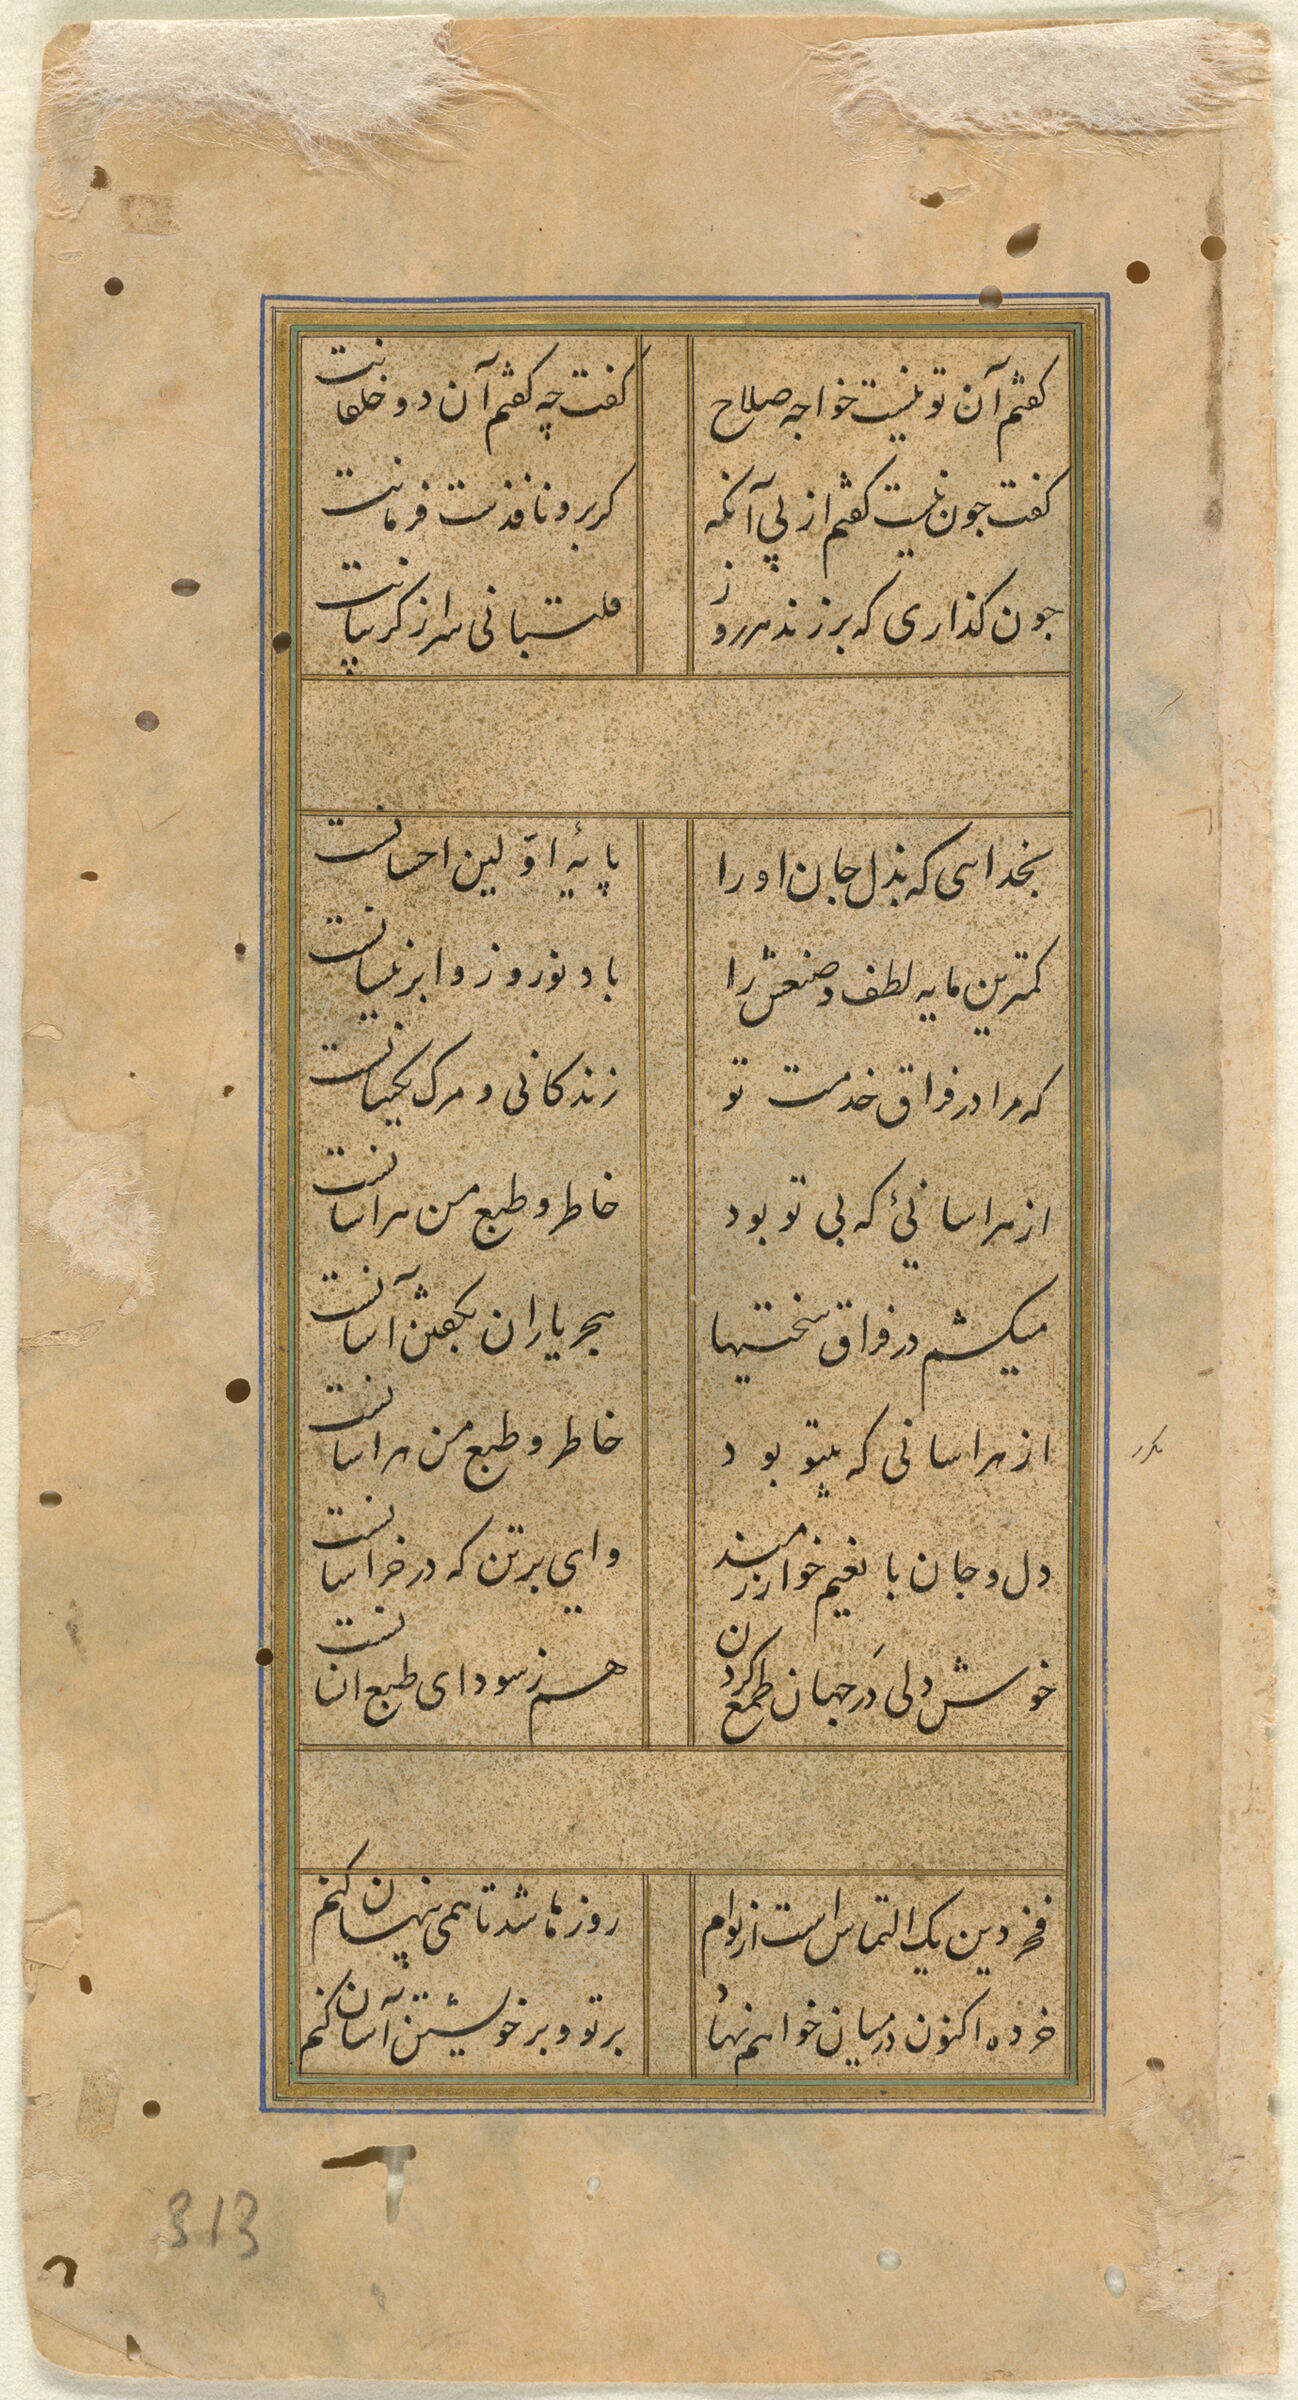 Folio 313 (Text, Recto And Verso), From A Manuscript Of The Divan (Collection Of Works) Of Anvari